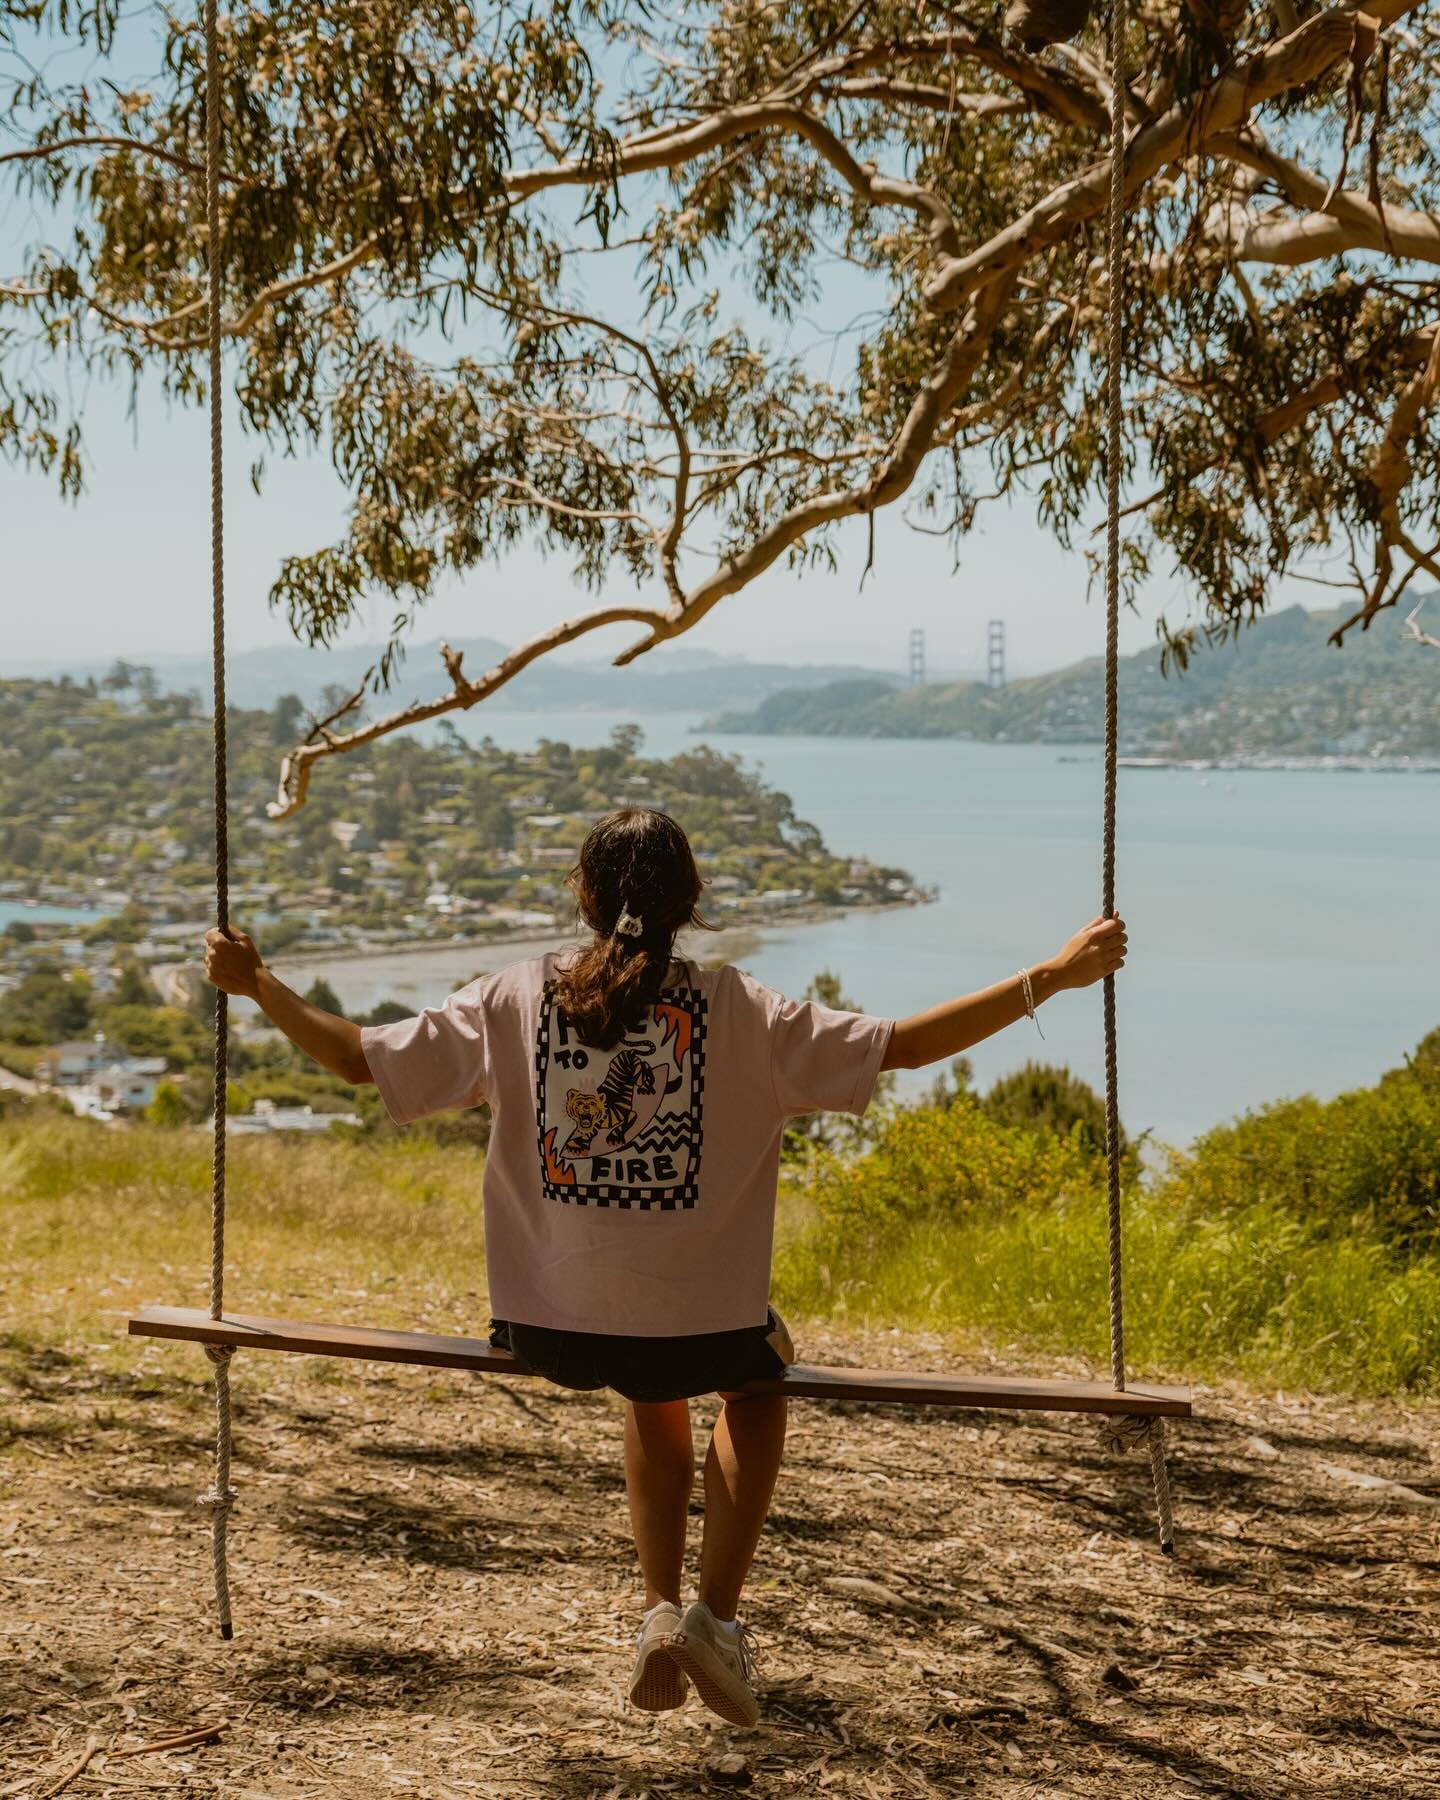 10 places you need to do in Tiburon, CA ✨🗺

🌟Go to the Hippie Tree Swing 🌳
🌟Take a cruise to Angel Island ⛴️
🌟Ride bikes in Angel Island 🚲
🌟Have lunch in Sam&rsquo;s Anchor Cafe 🍽
🌟Walk the Tiburon Historical Trail and admire the views of th